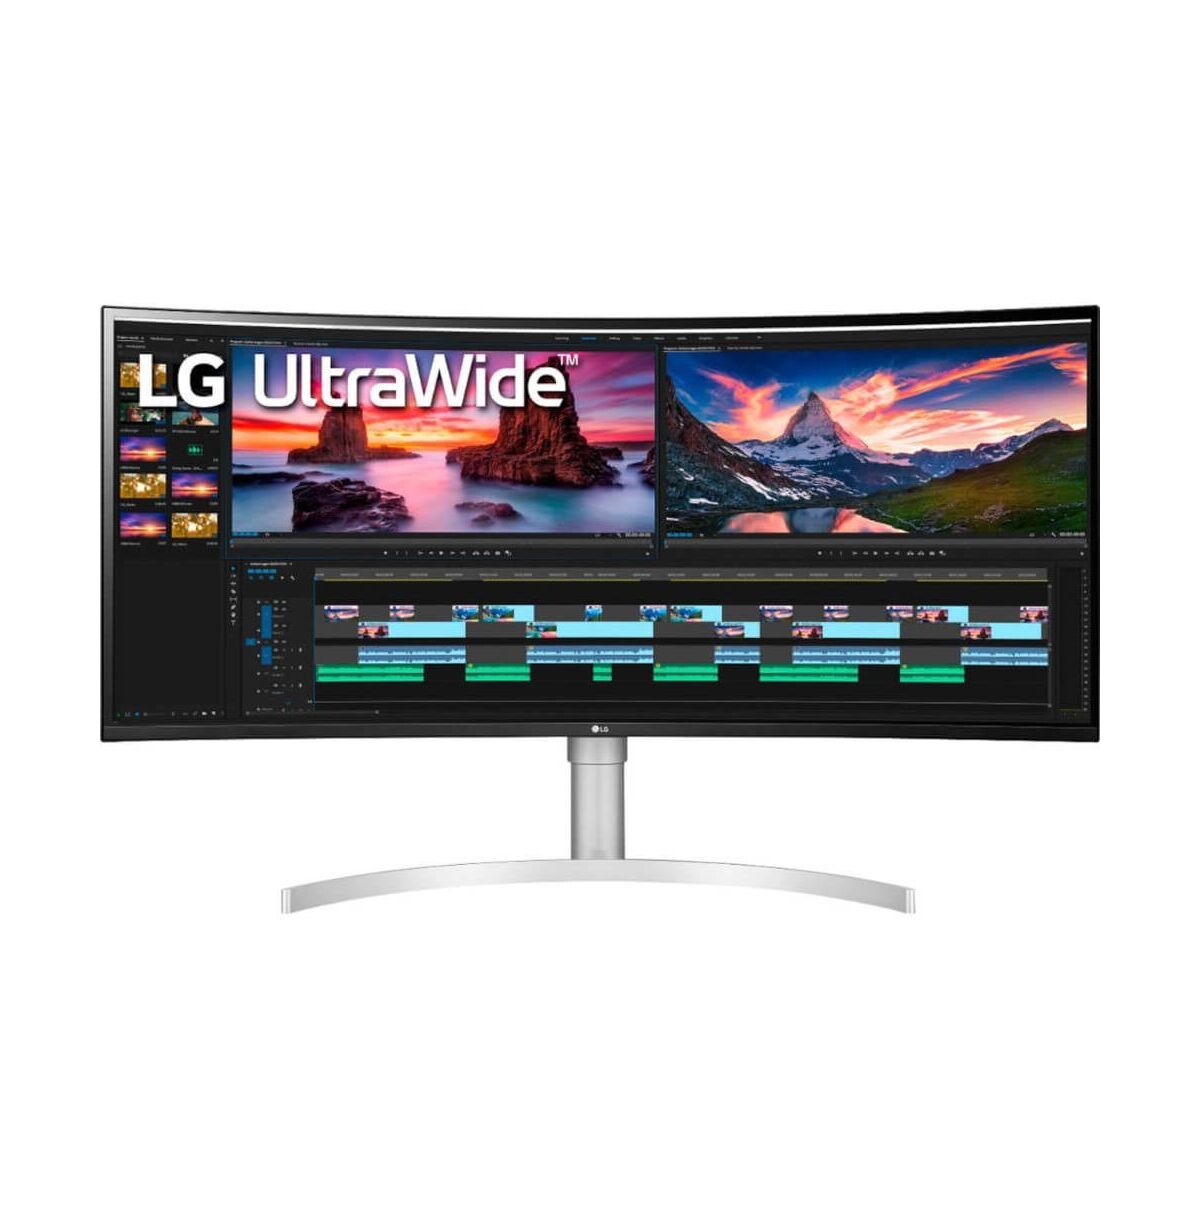 LG 38 inch UltraWide Ips Hdr G-sync Compatible Curved Monitor - Silver - Silver